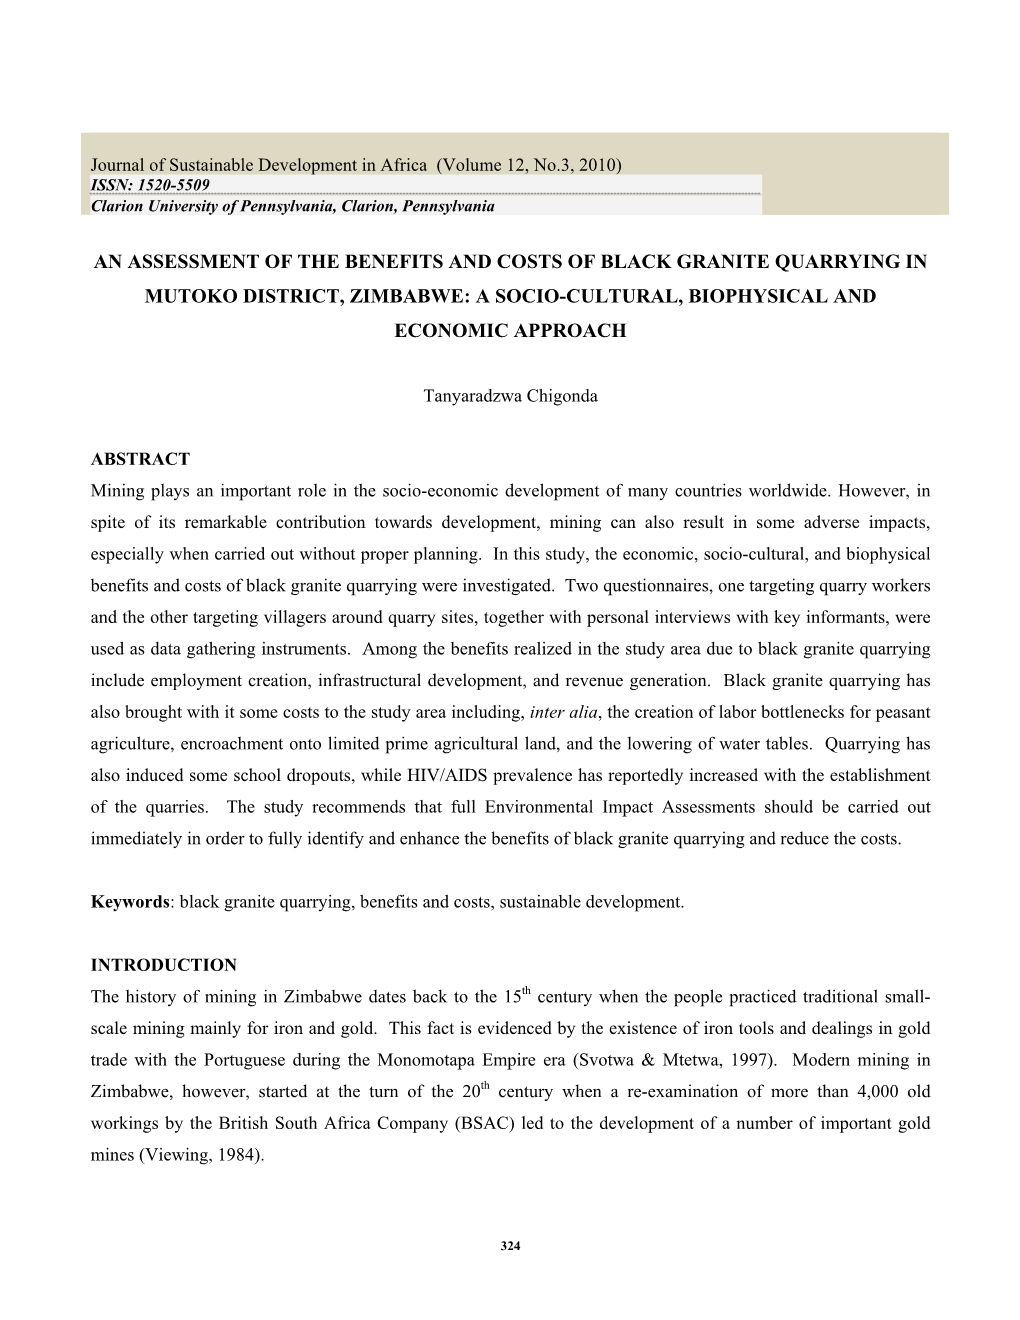 An Assessment of the Benefits and Costs of Black Granite Quarrying in Mutoko District, Zimbabwe: a Socio-Cultural, Biophysical and Economic Approach